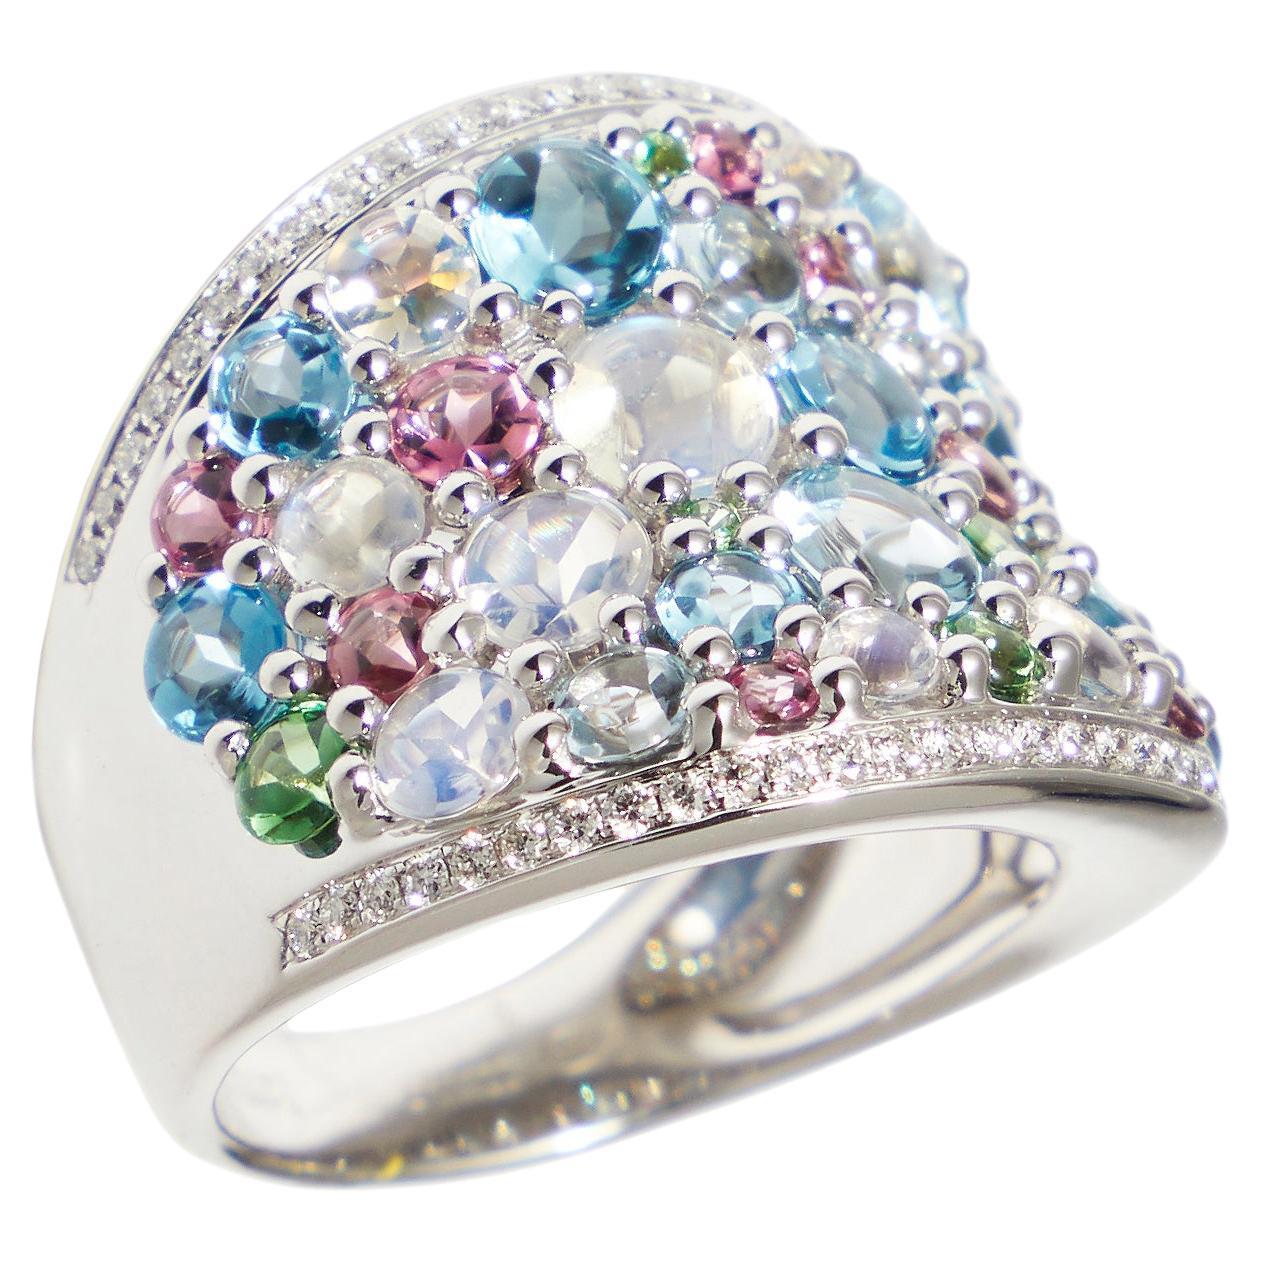 18 karat mixed gem ring with pink blue and rainbow moonstones